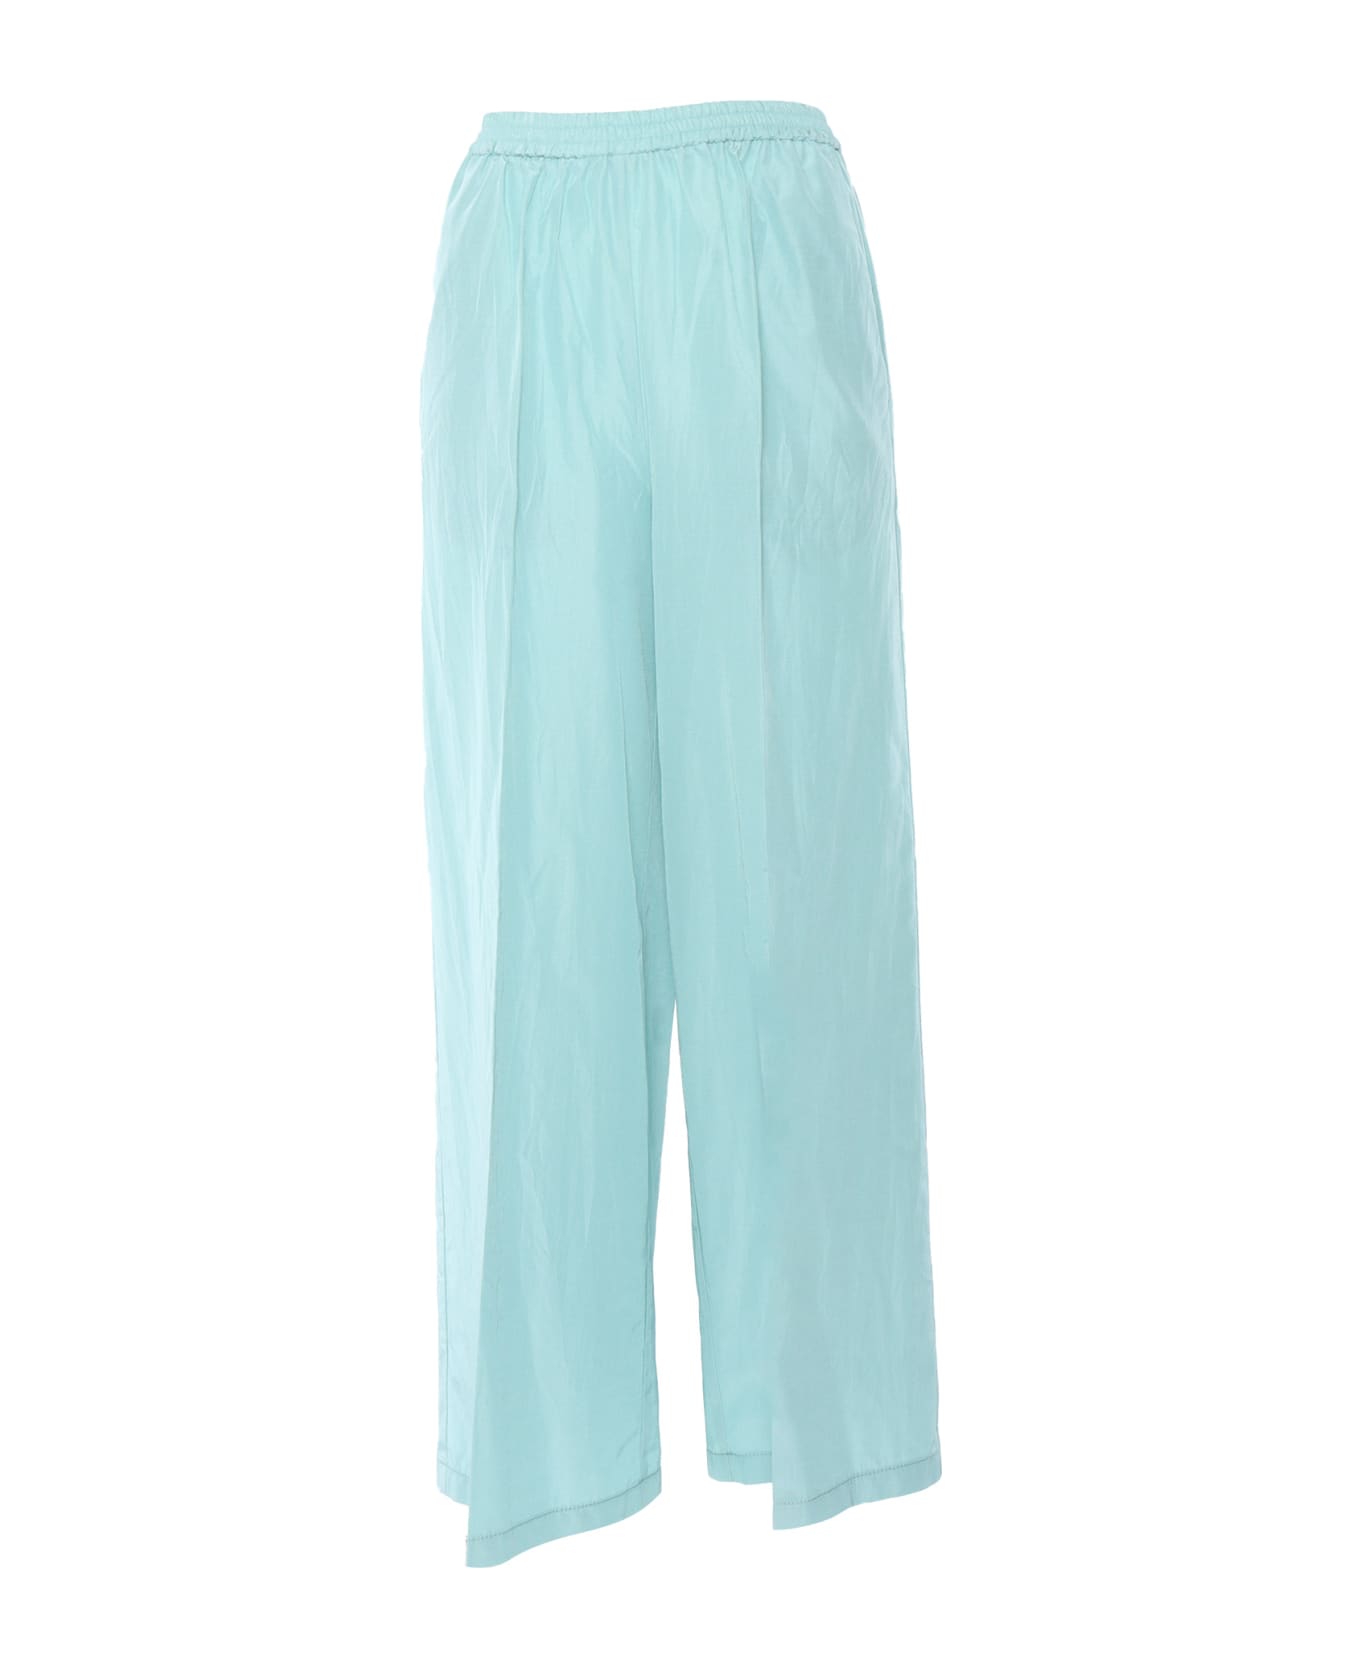 Forte_Forte Palazzo Trousers - LIGHT BLUE ボトムス